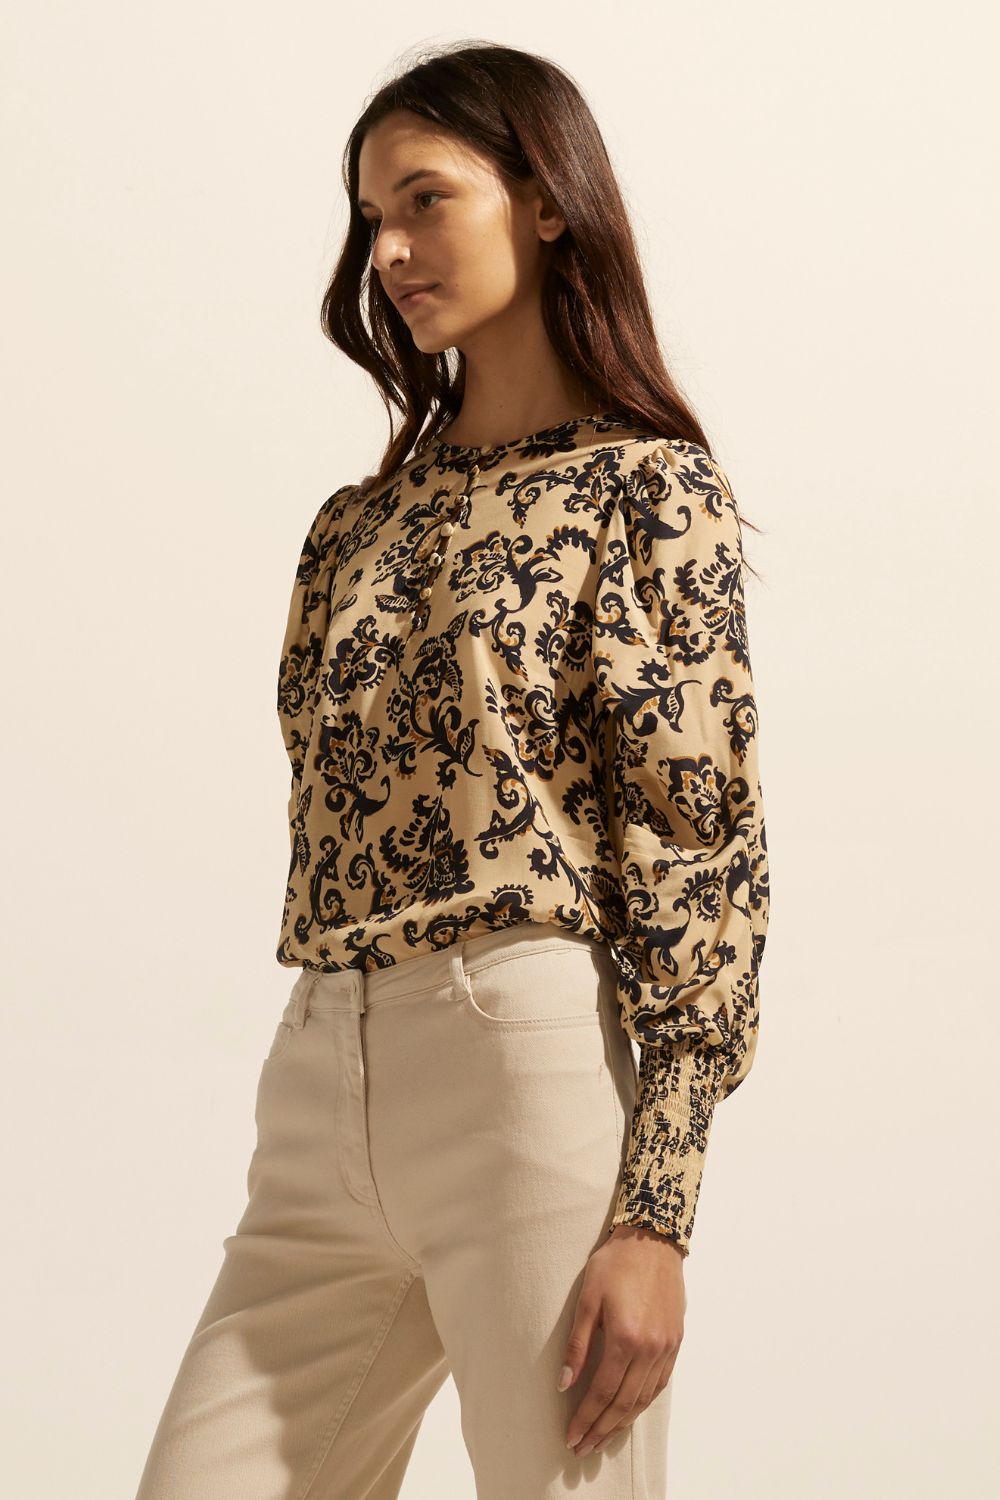 ochre, floral, yellow, top, long sleeve, shirred cuffs, blouson sleeve, covered buttons round neckline, side image